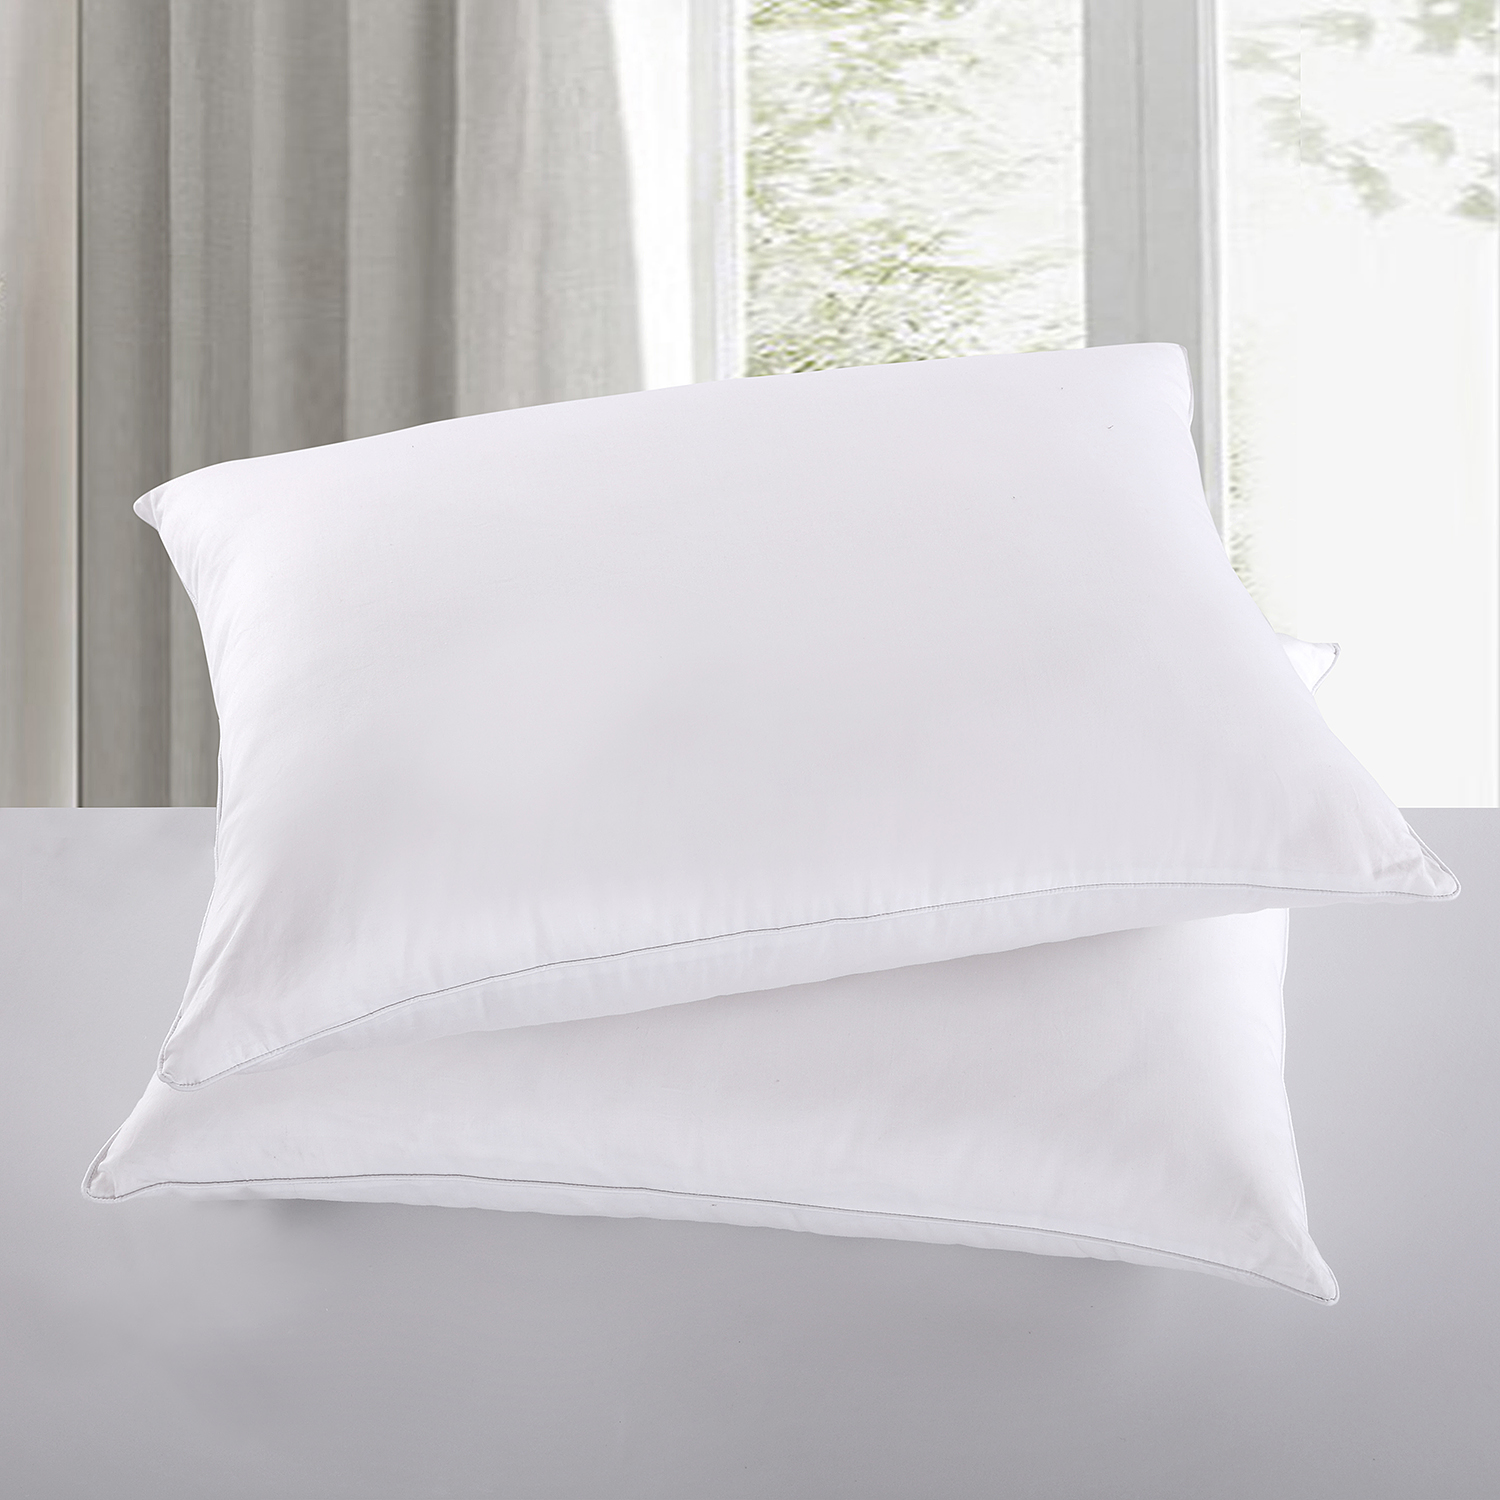 CottonLux 500 Thread Count Cottonloft All Natural 100% Cotton and Feather Core Bed Pillow